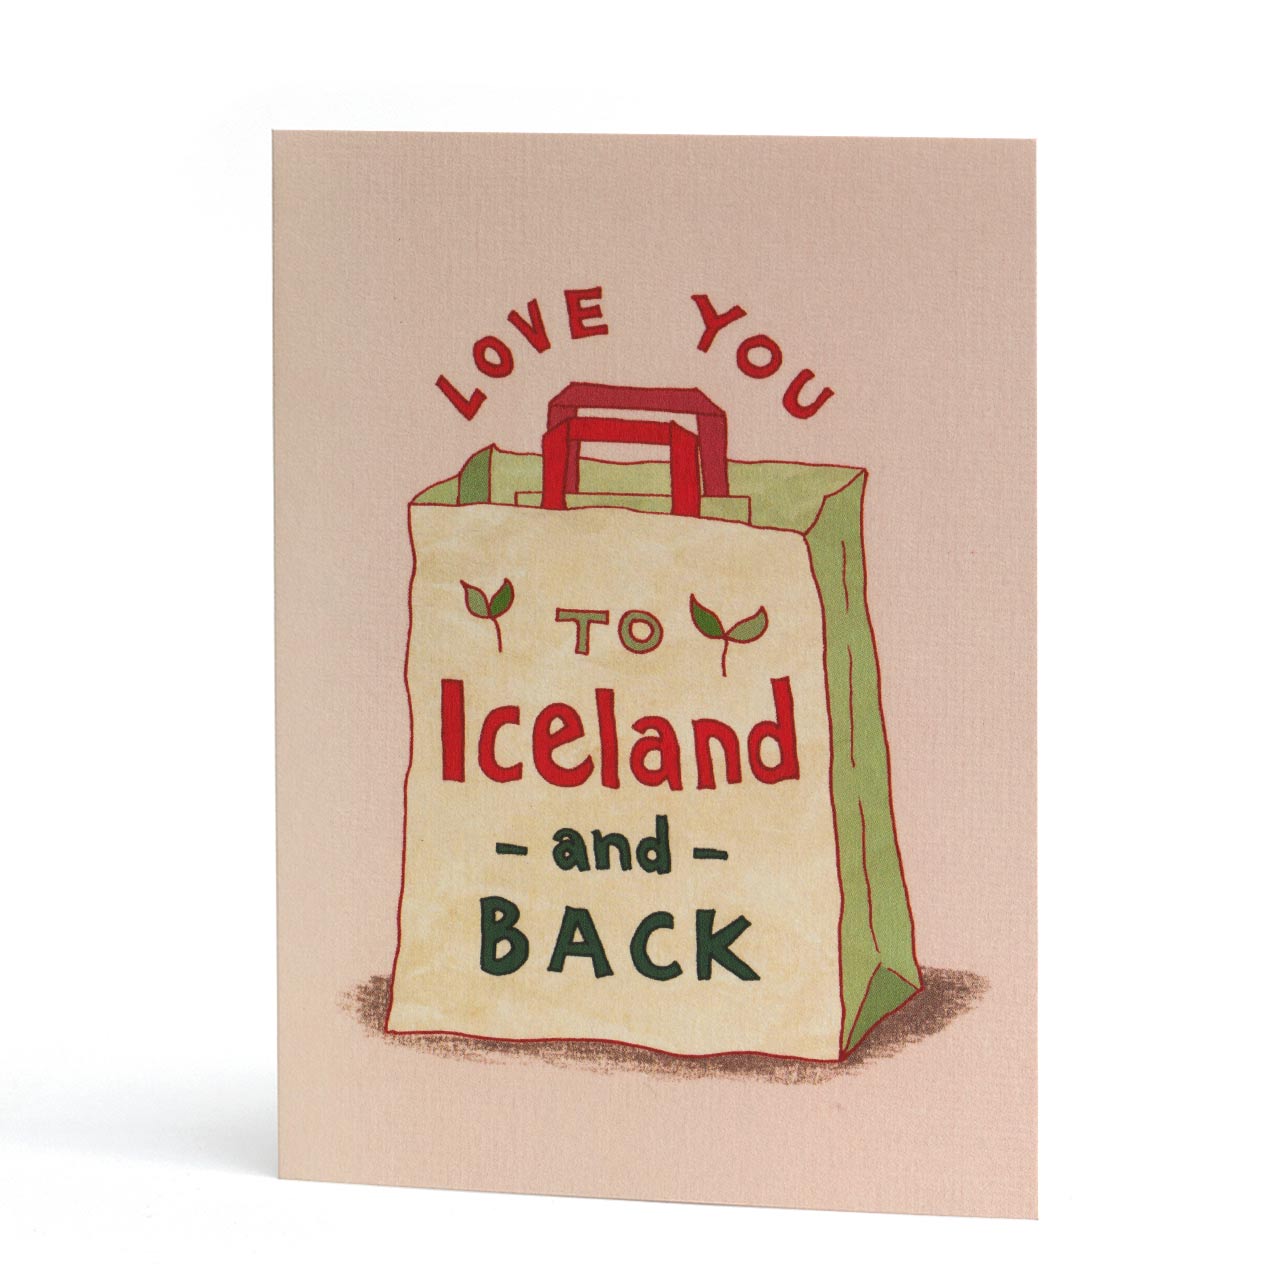 Love You to Iceland and Back Greeting Card